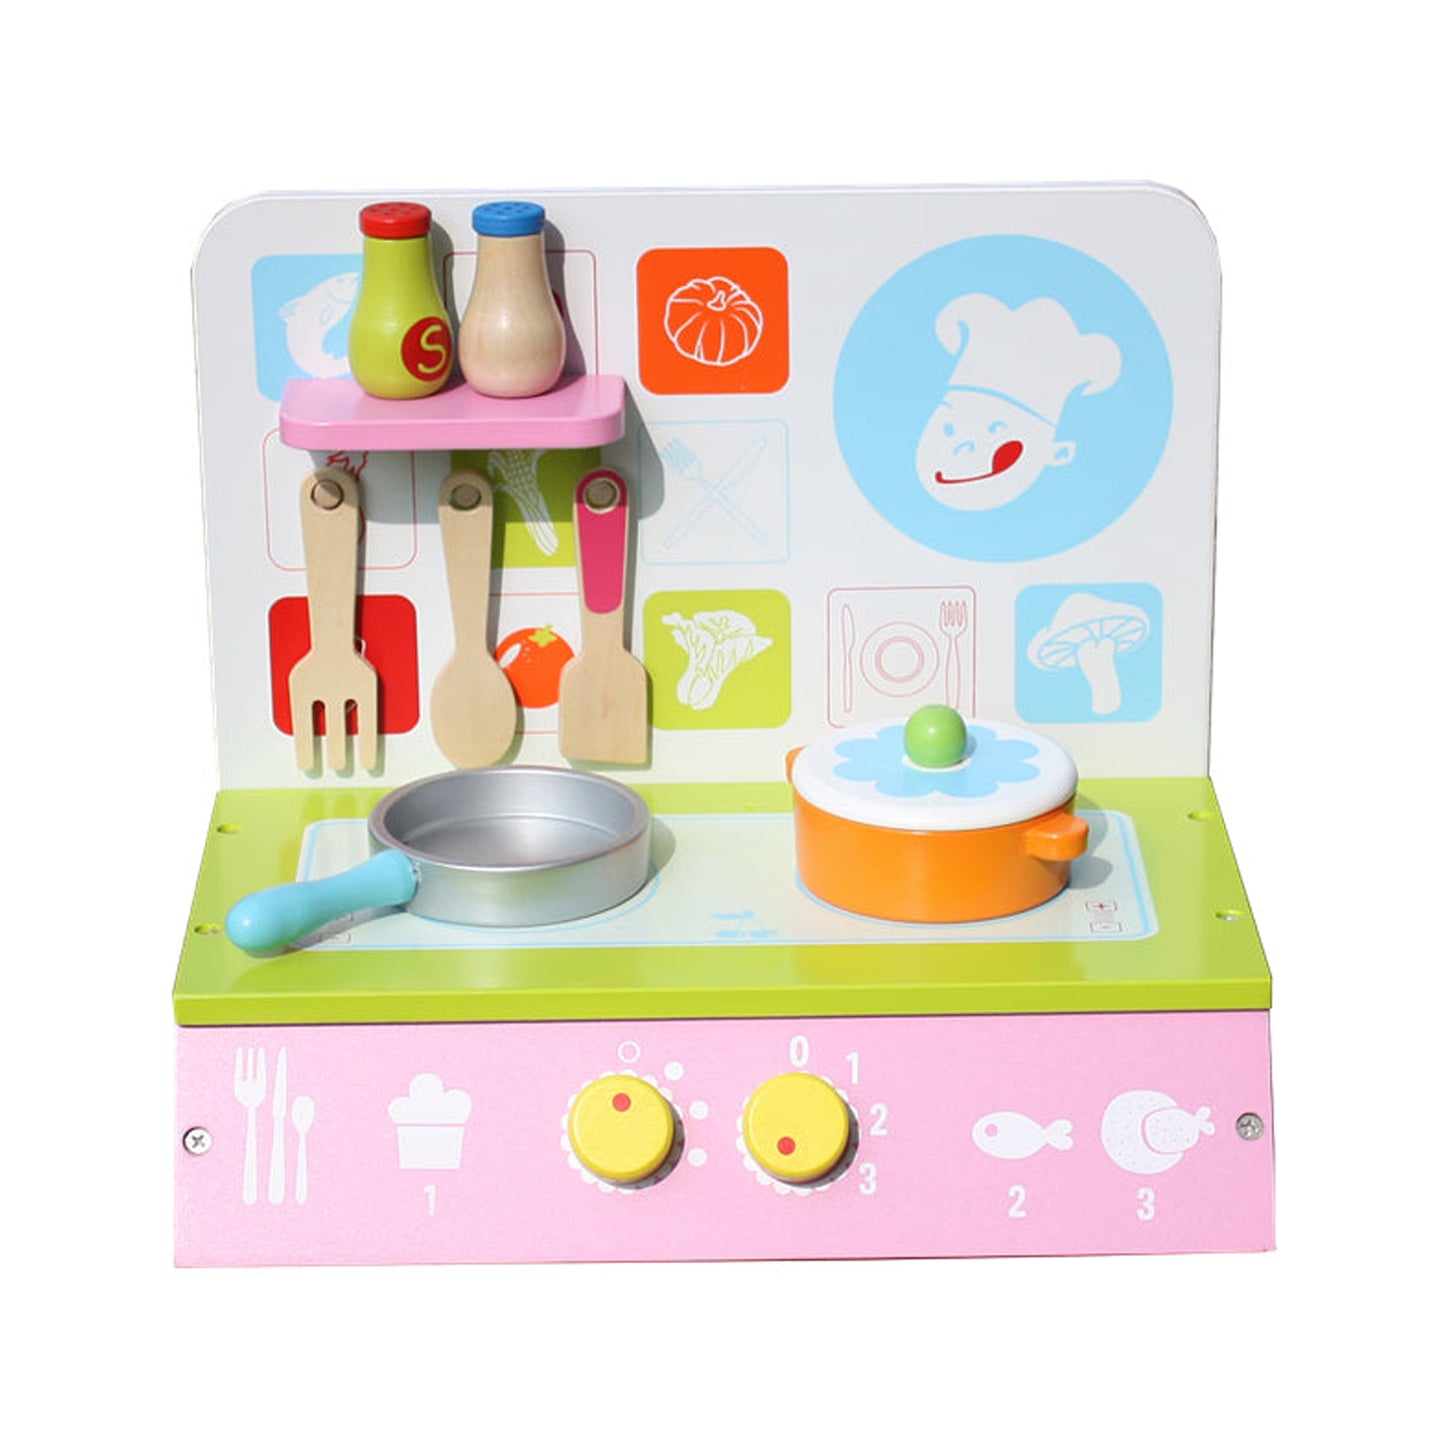 Kids Wooden Play Kitchen Set with Accessories by Liberty House Toys